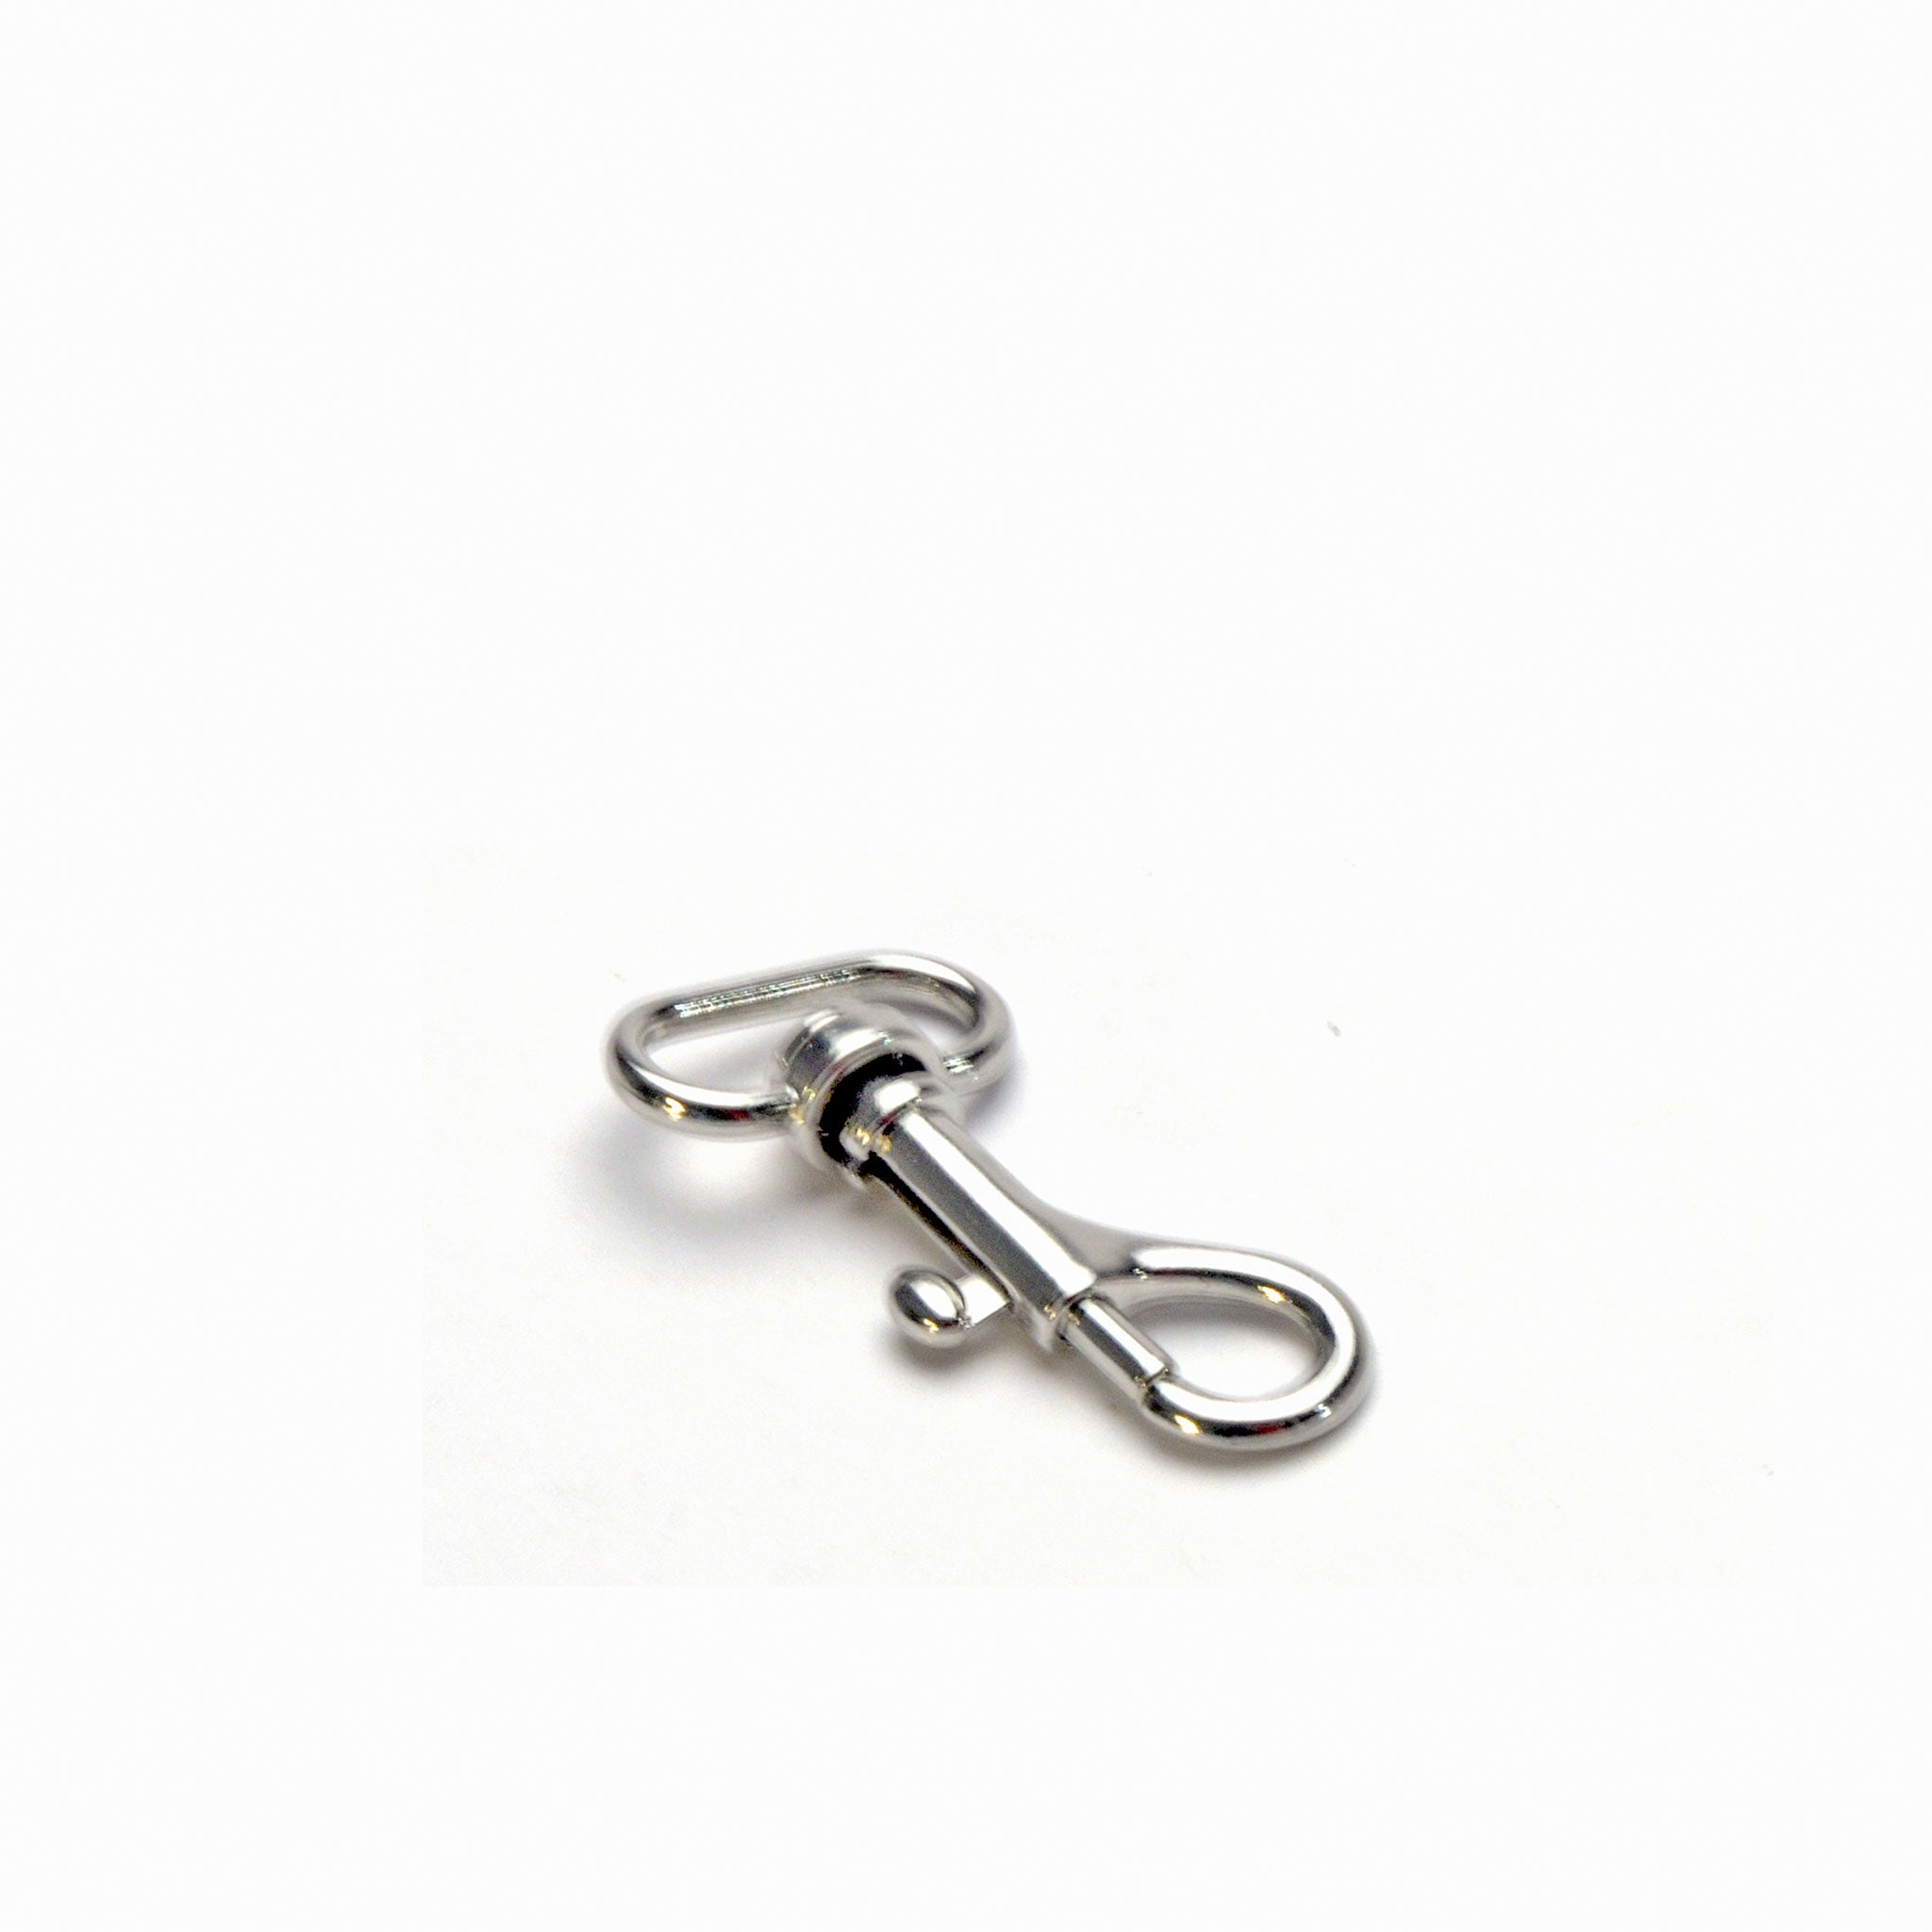 19mm Bag/All Purpose Swivel Clip - Nickel from Identity Leathercraft